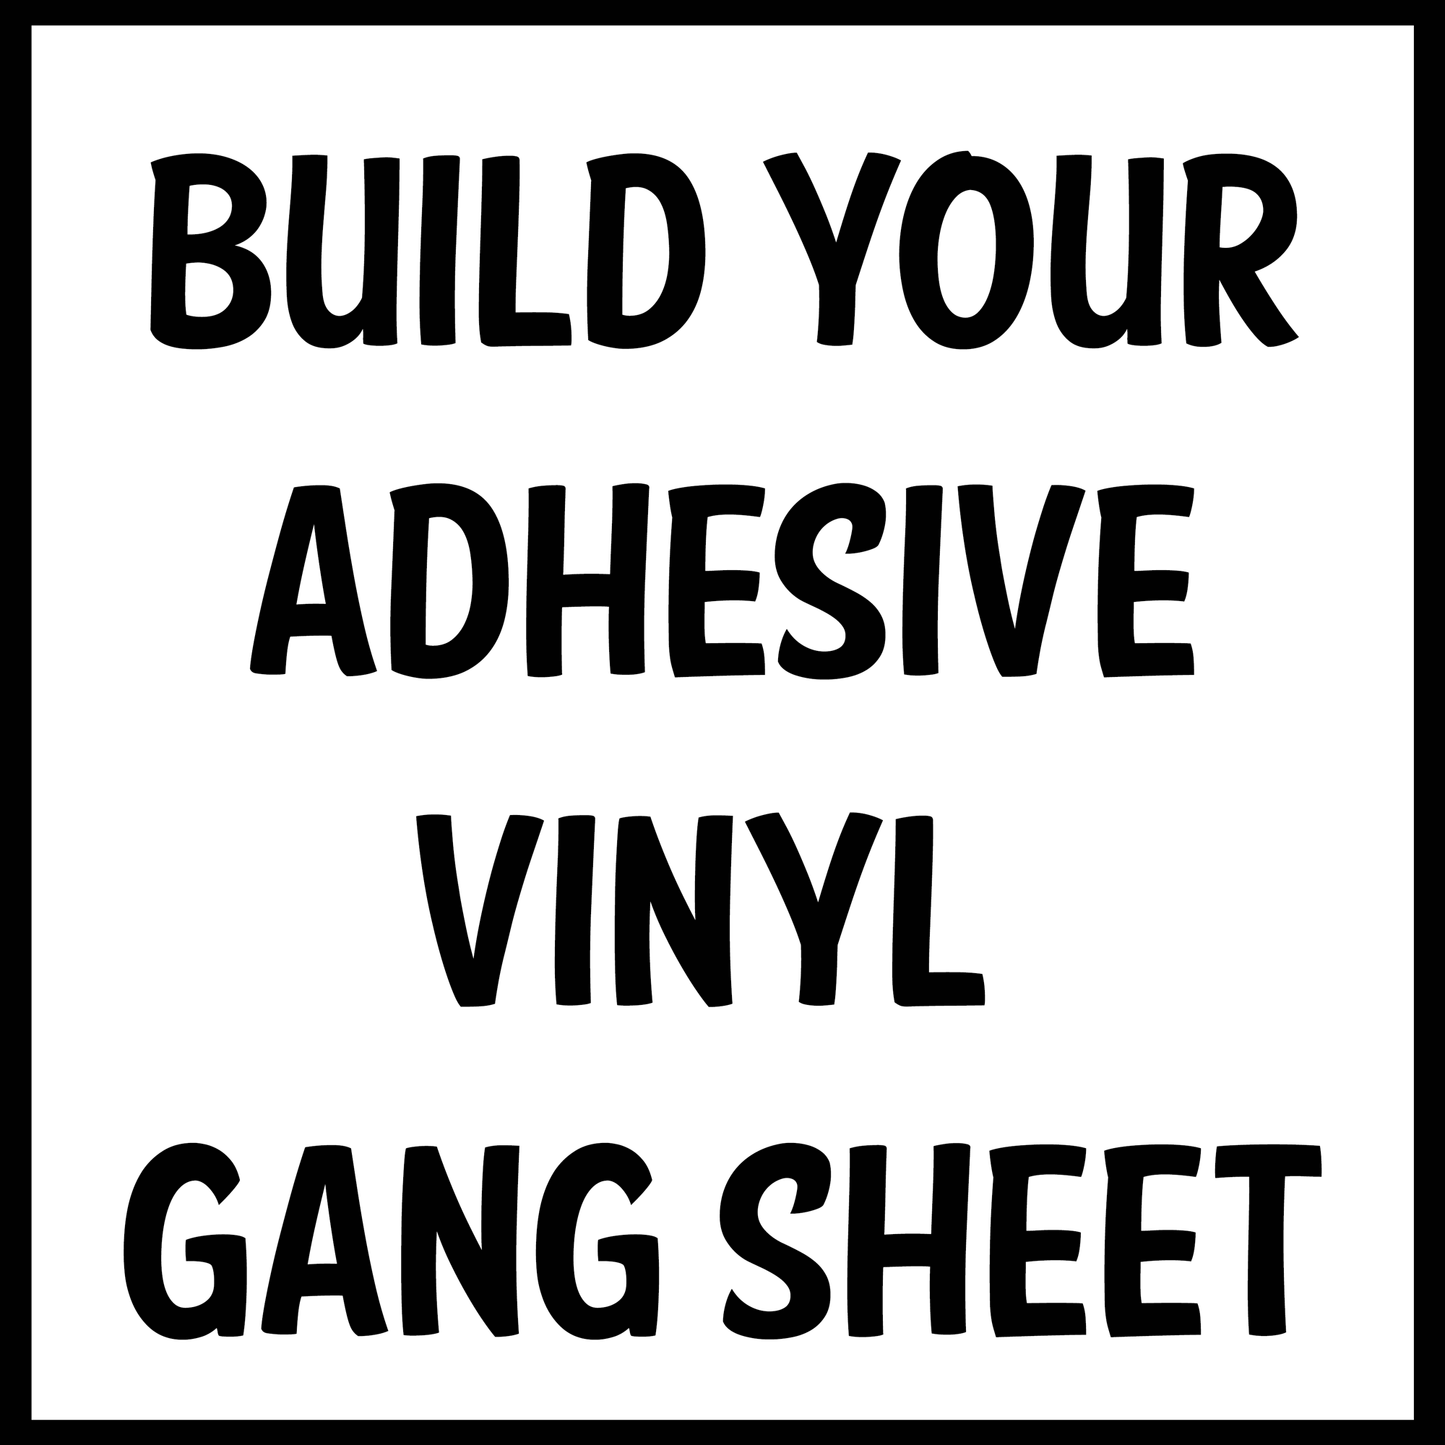 Build Your Own Adhesive Gang Sheet - White